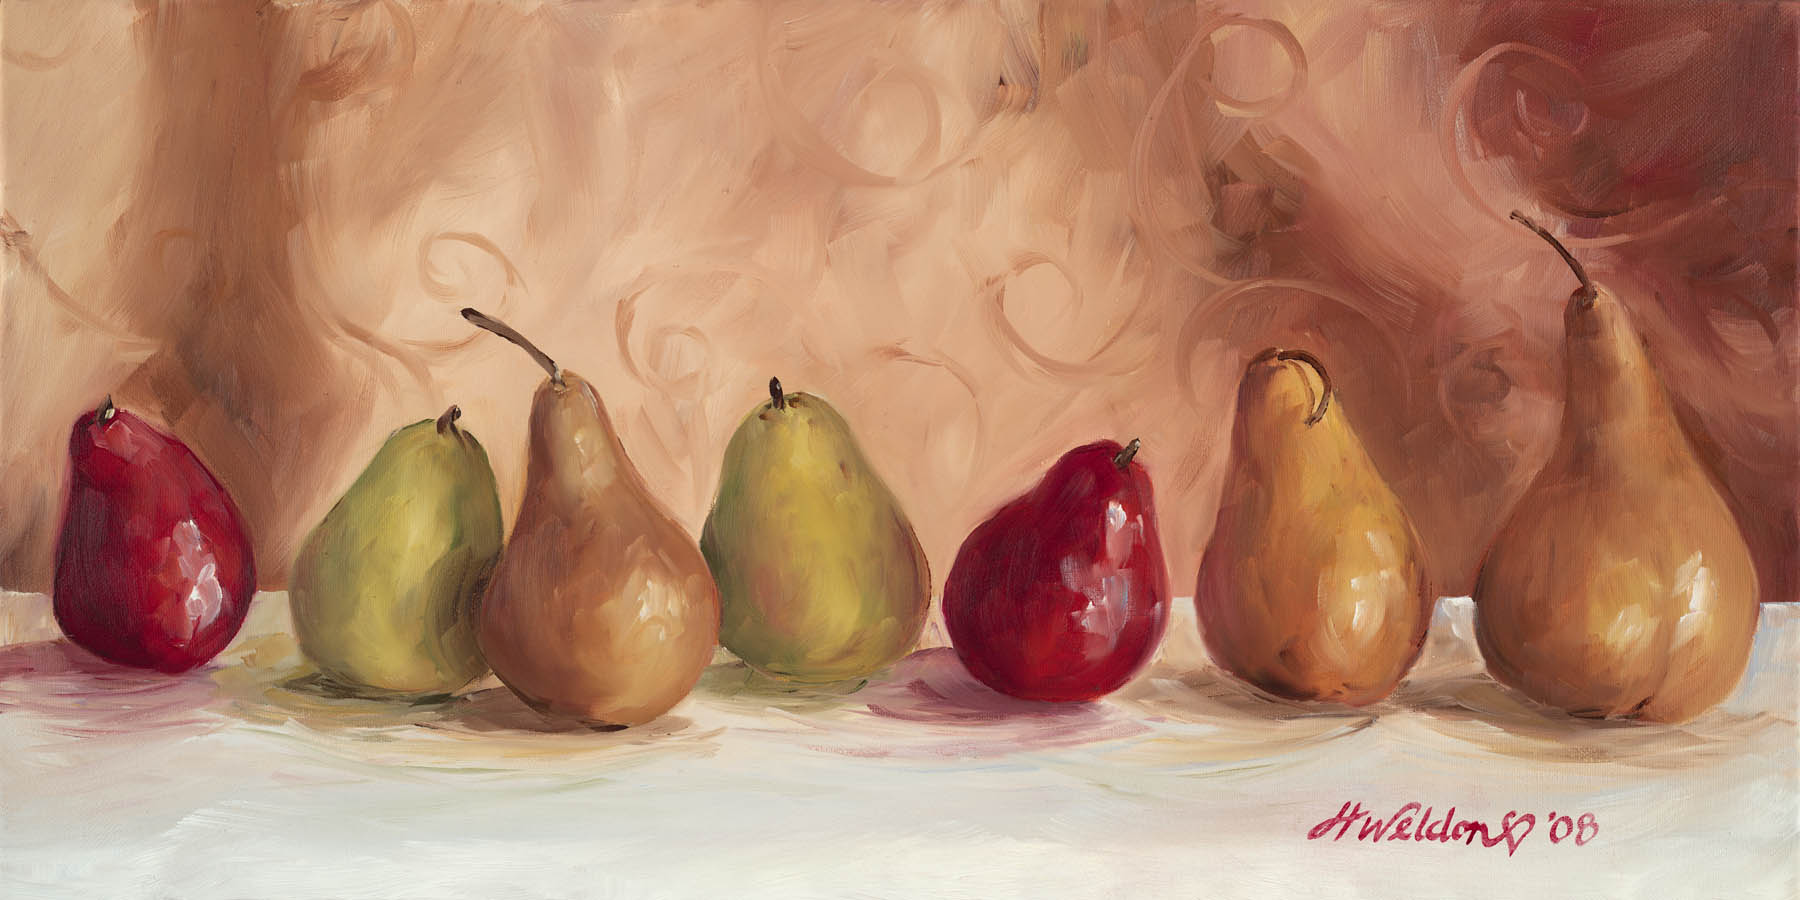 "Pears on Parade"